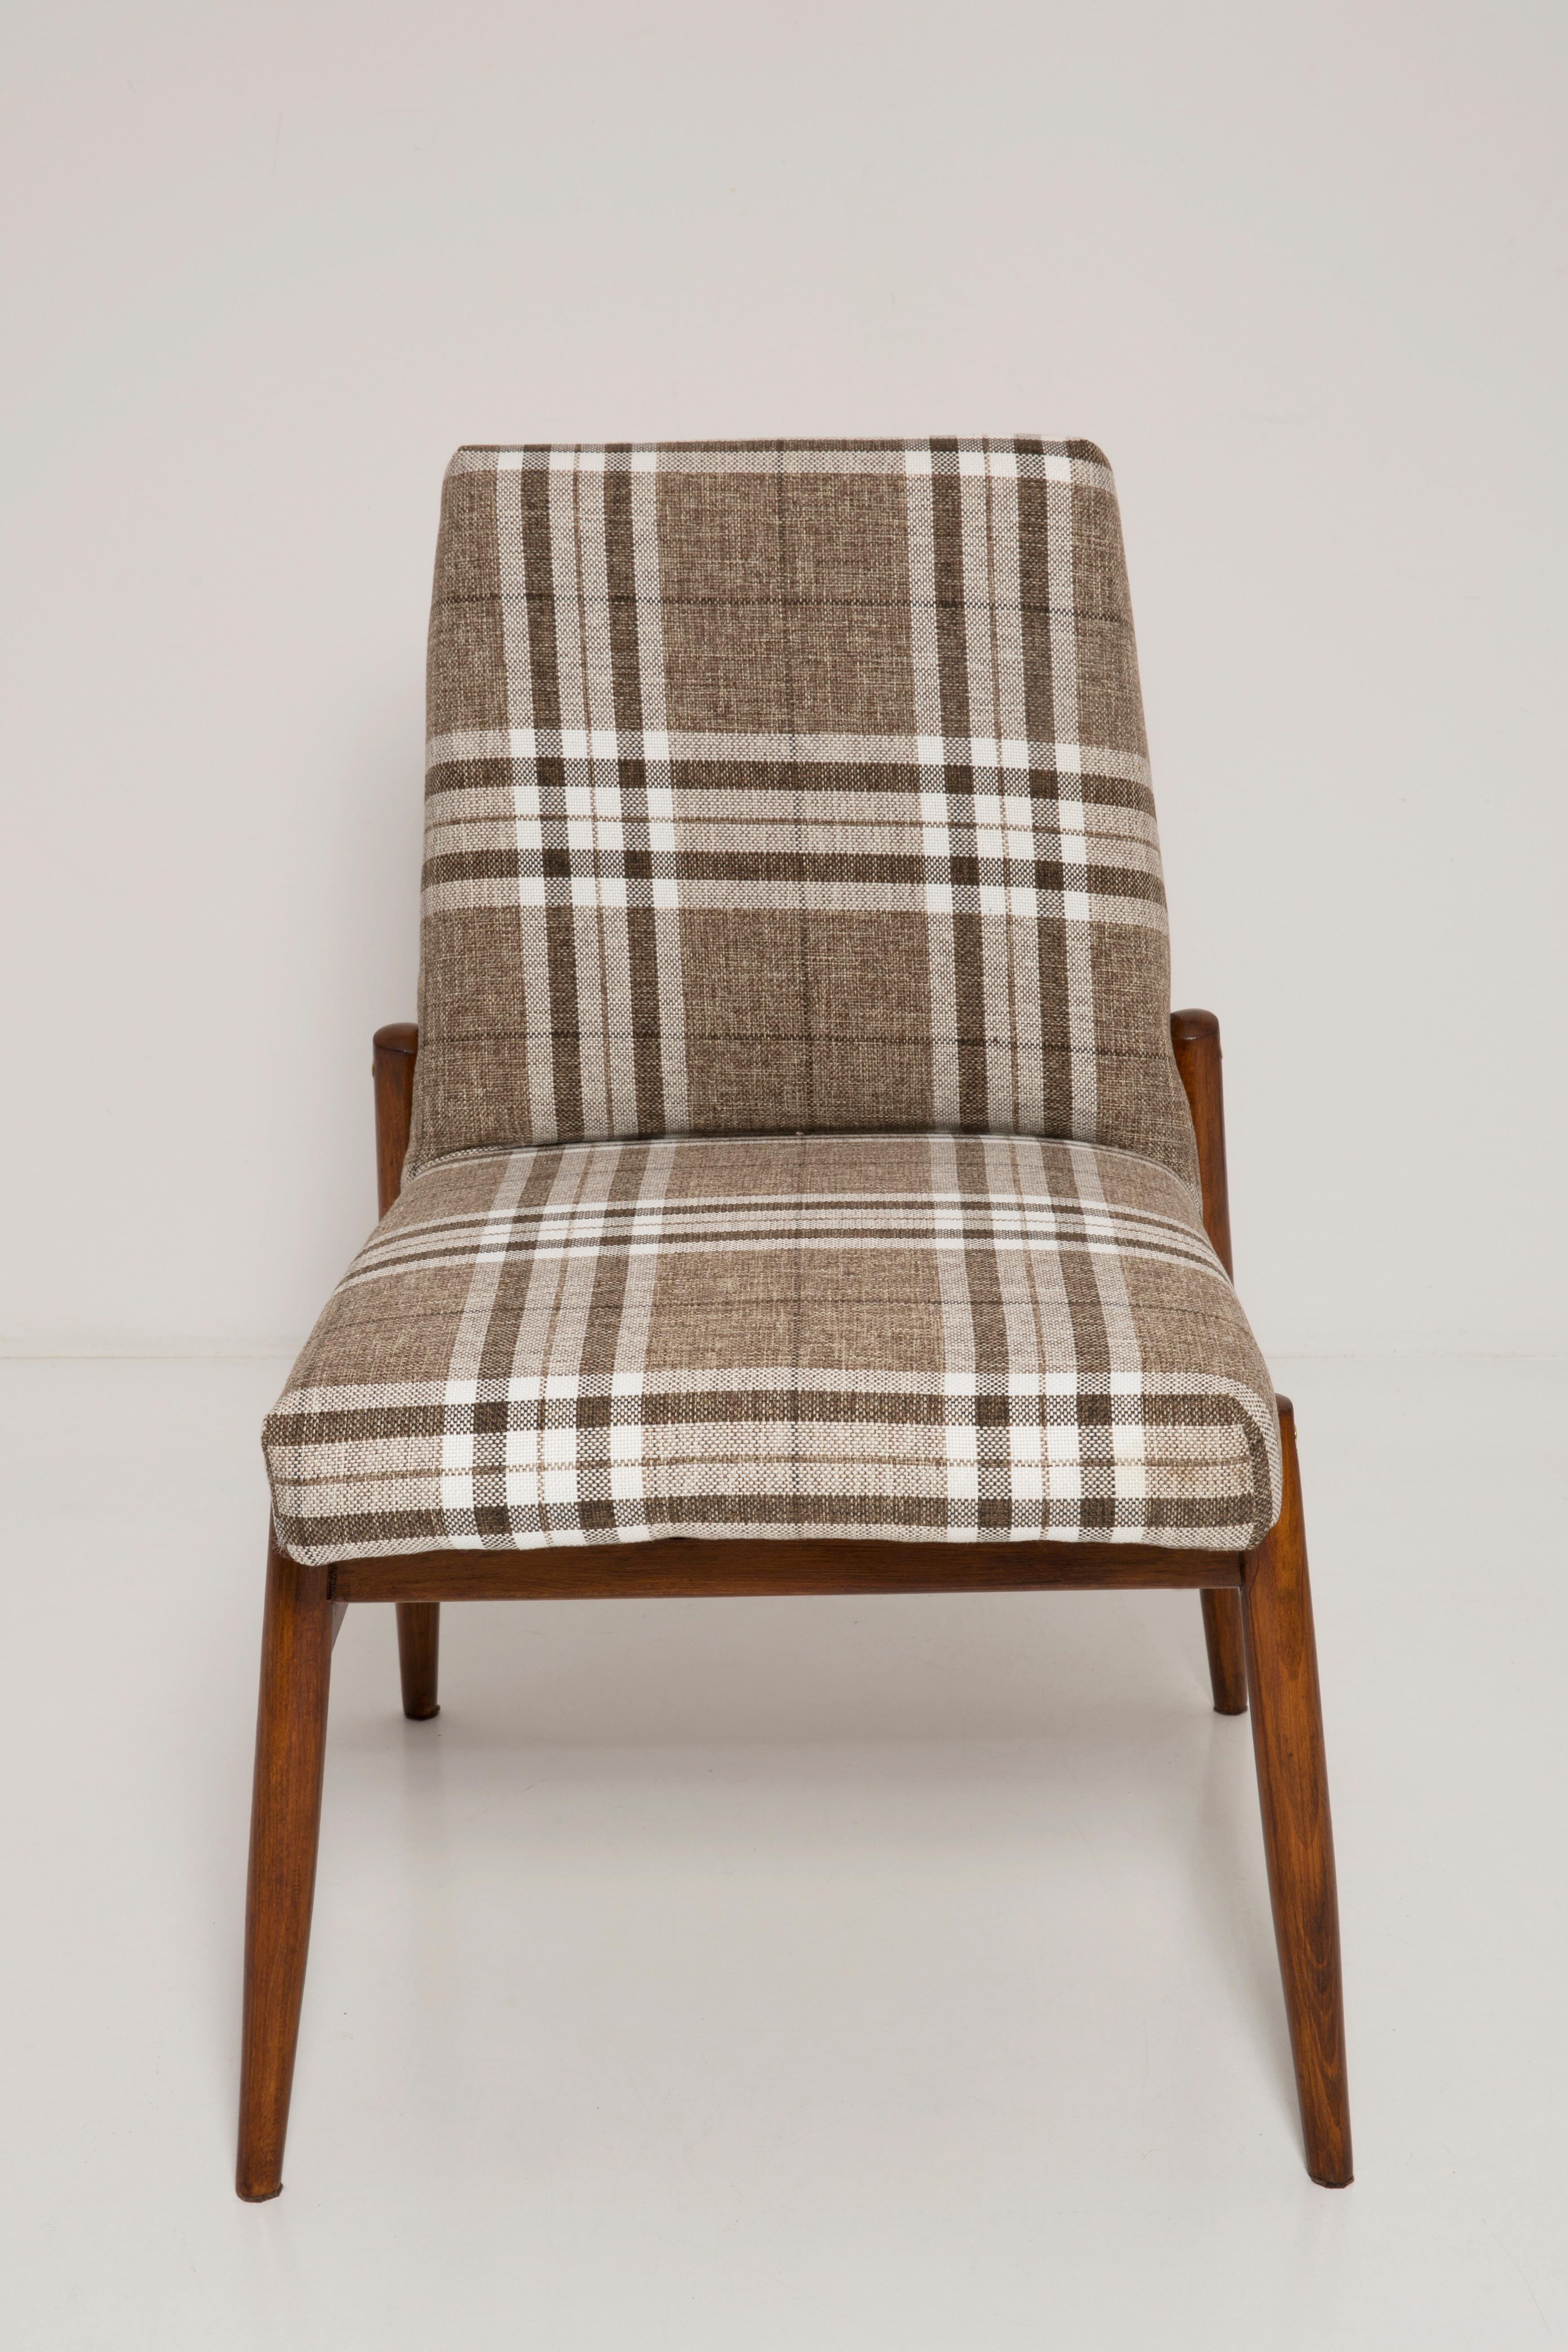 Polish 20th Century Beige Checkered Fabric Armchair, 300-227 Type, Europe, 1960s For Sale